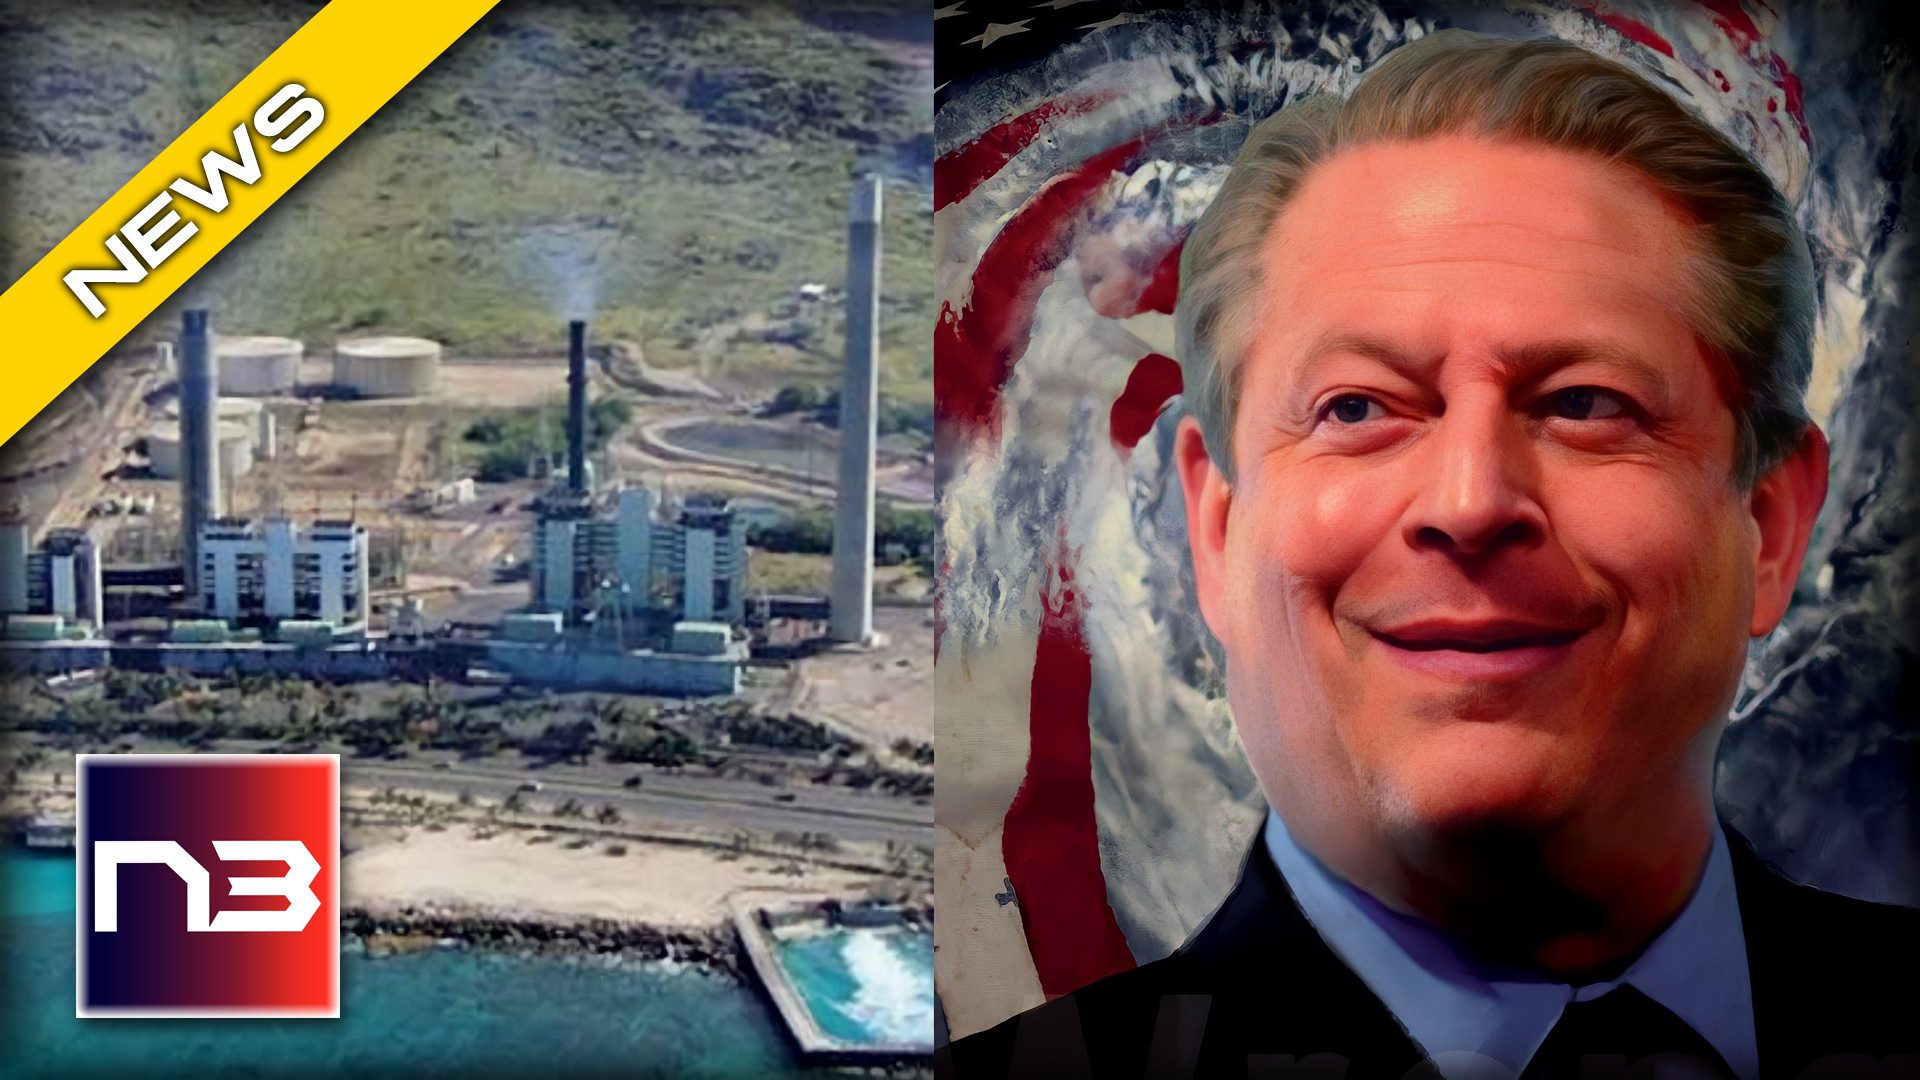 Hawaii SHUTS DOWN Critical Infrastructure To Appease Woke Climate Alarmists